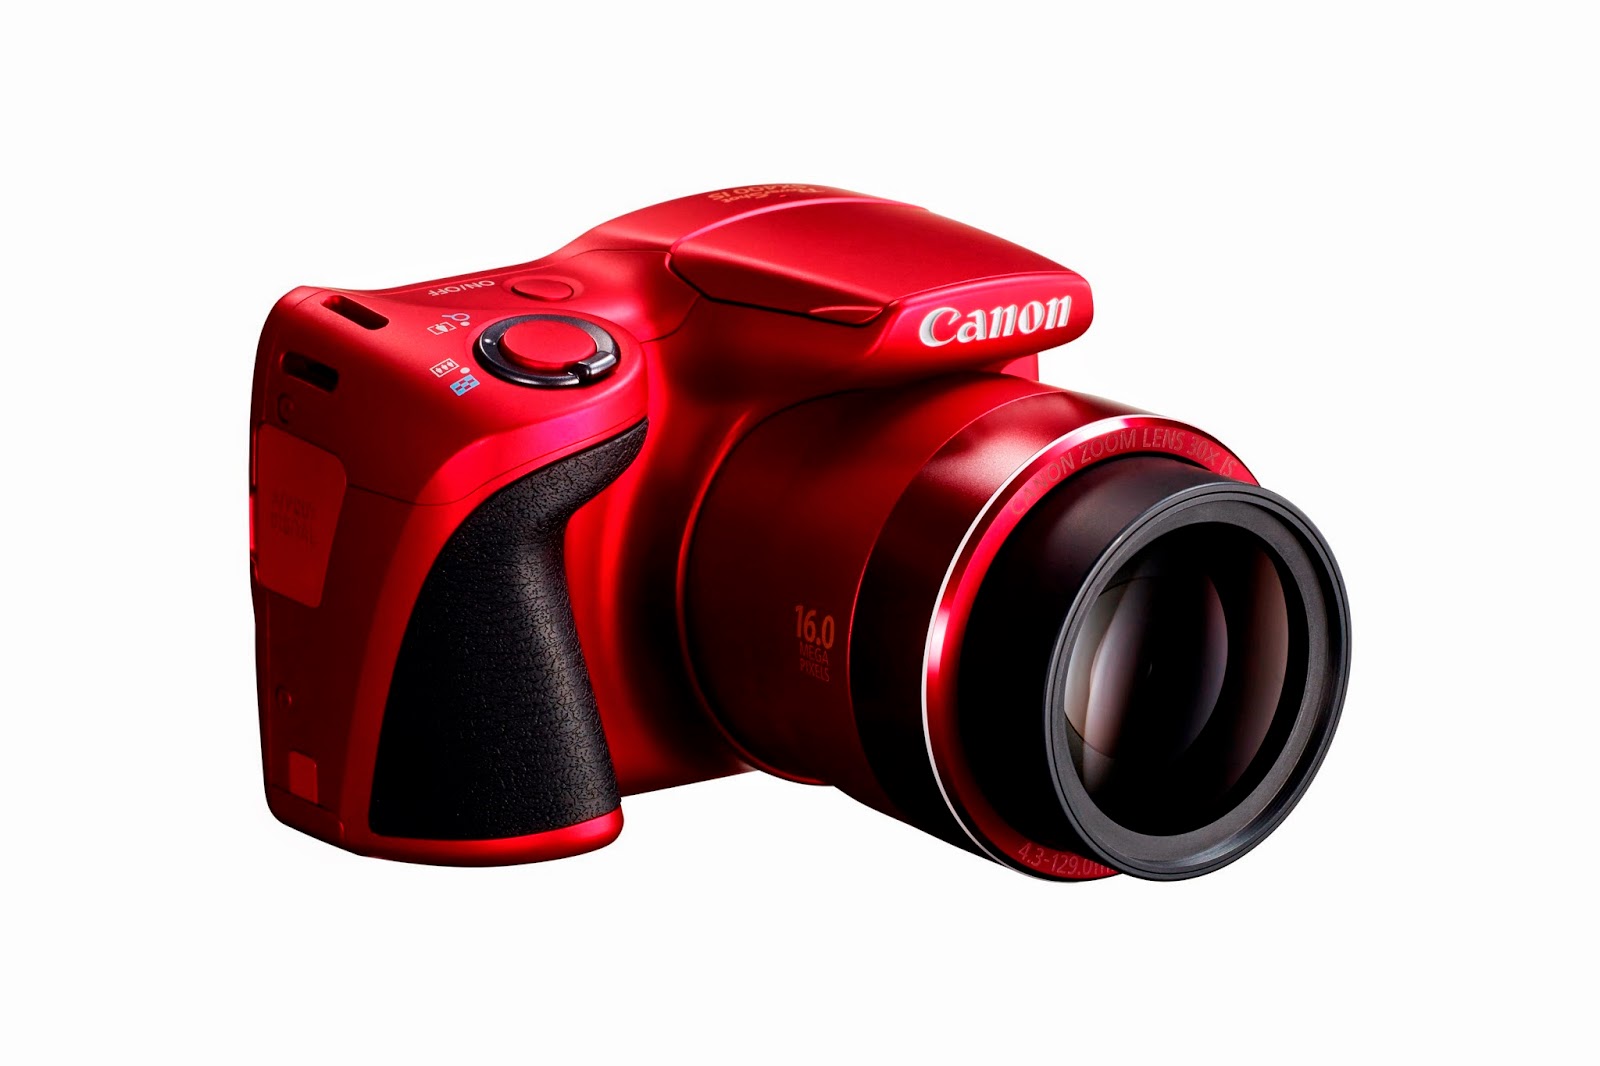 Company News in Egypt: Capture everything with the new Canon PowerShot